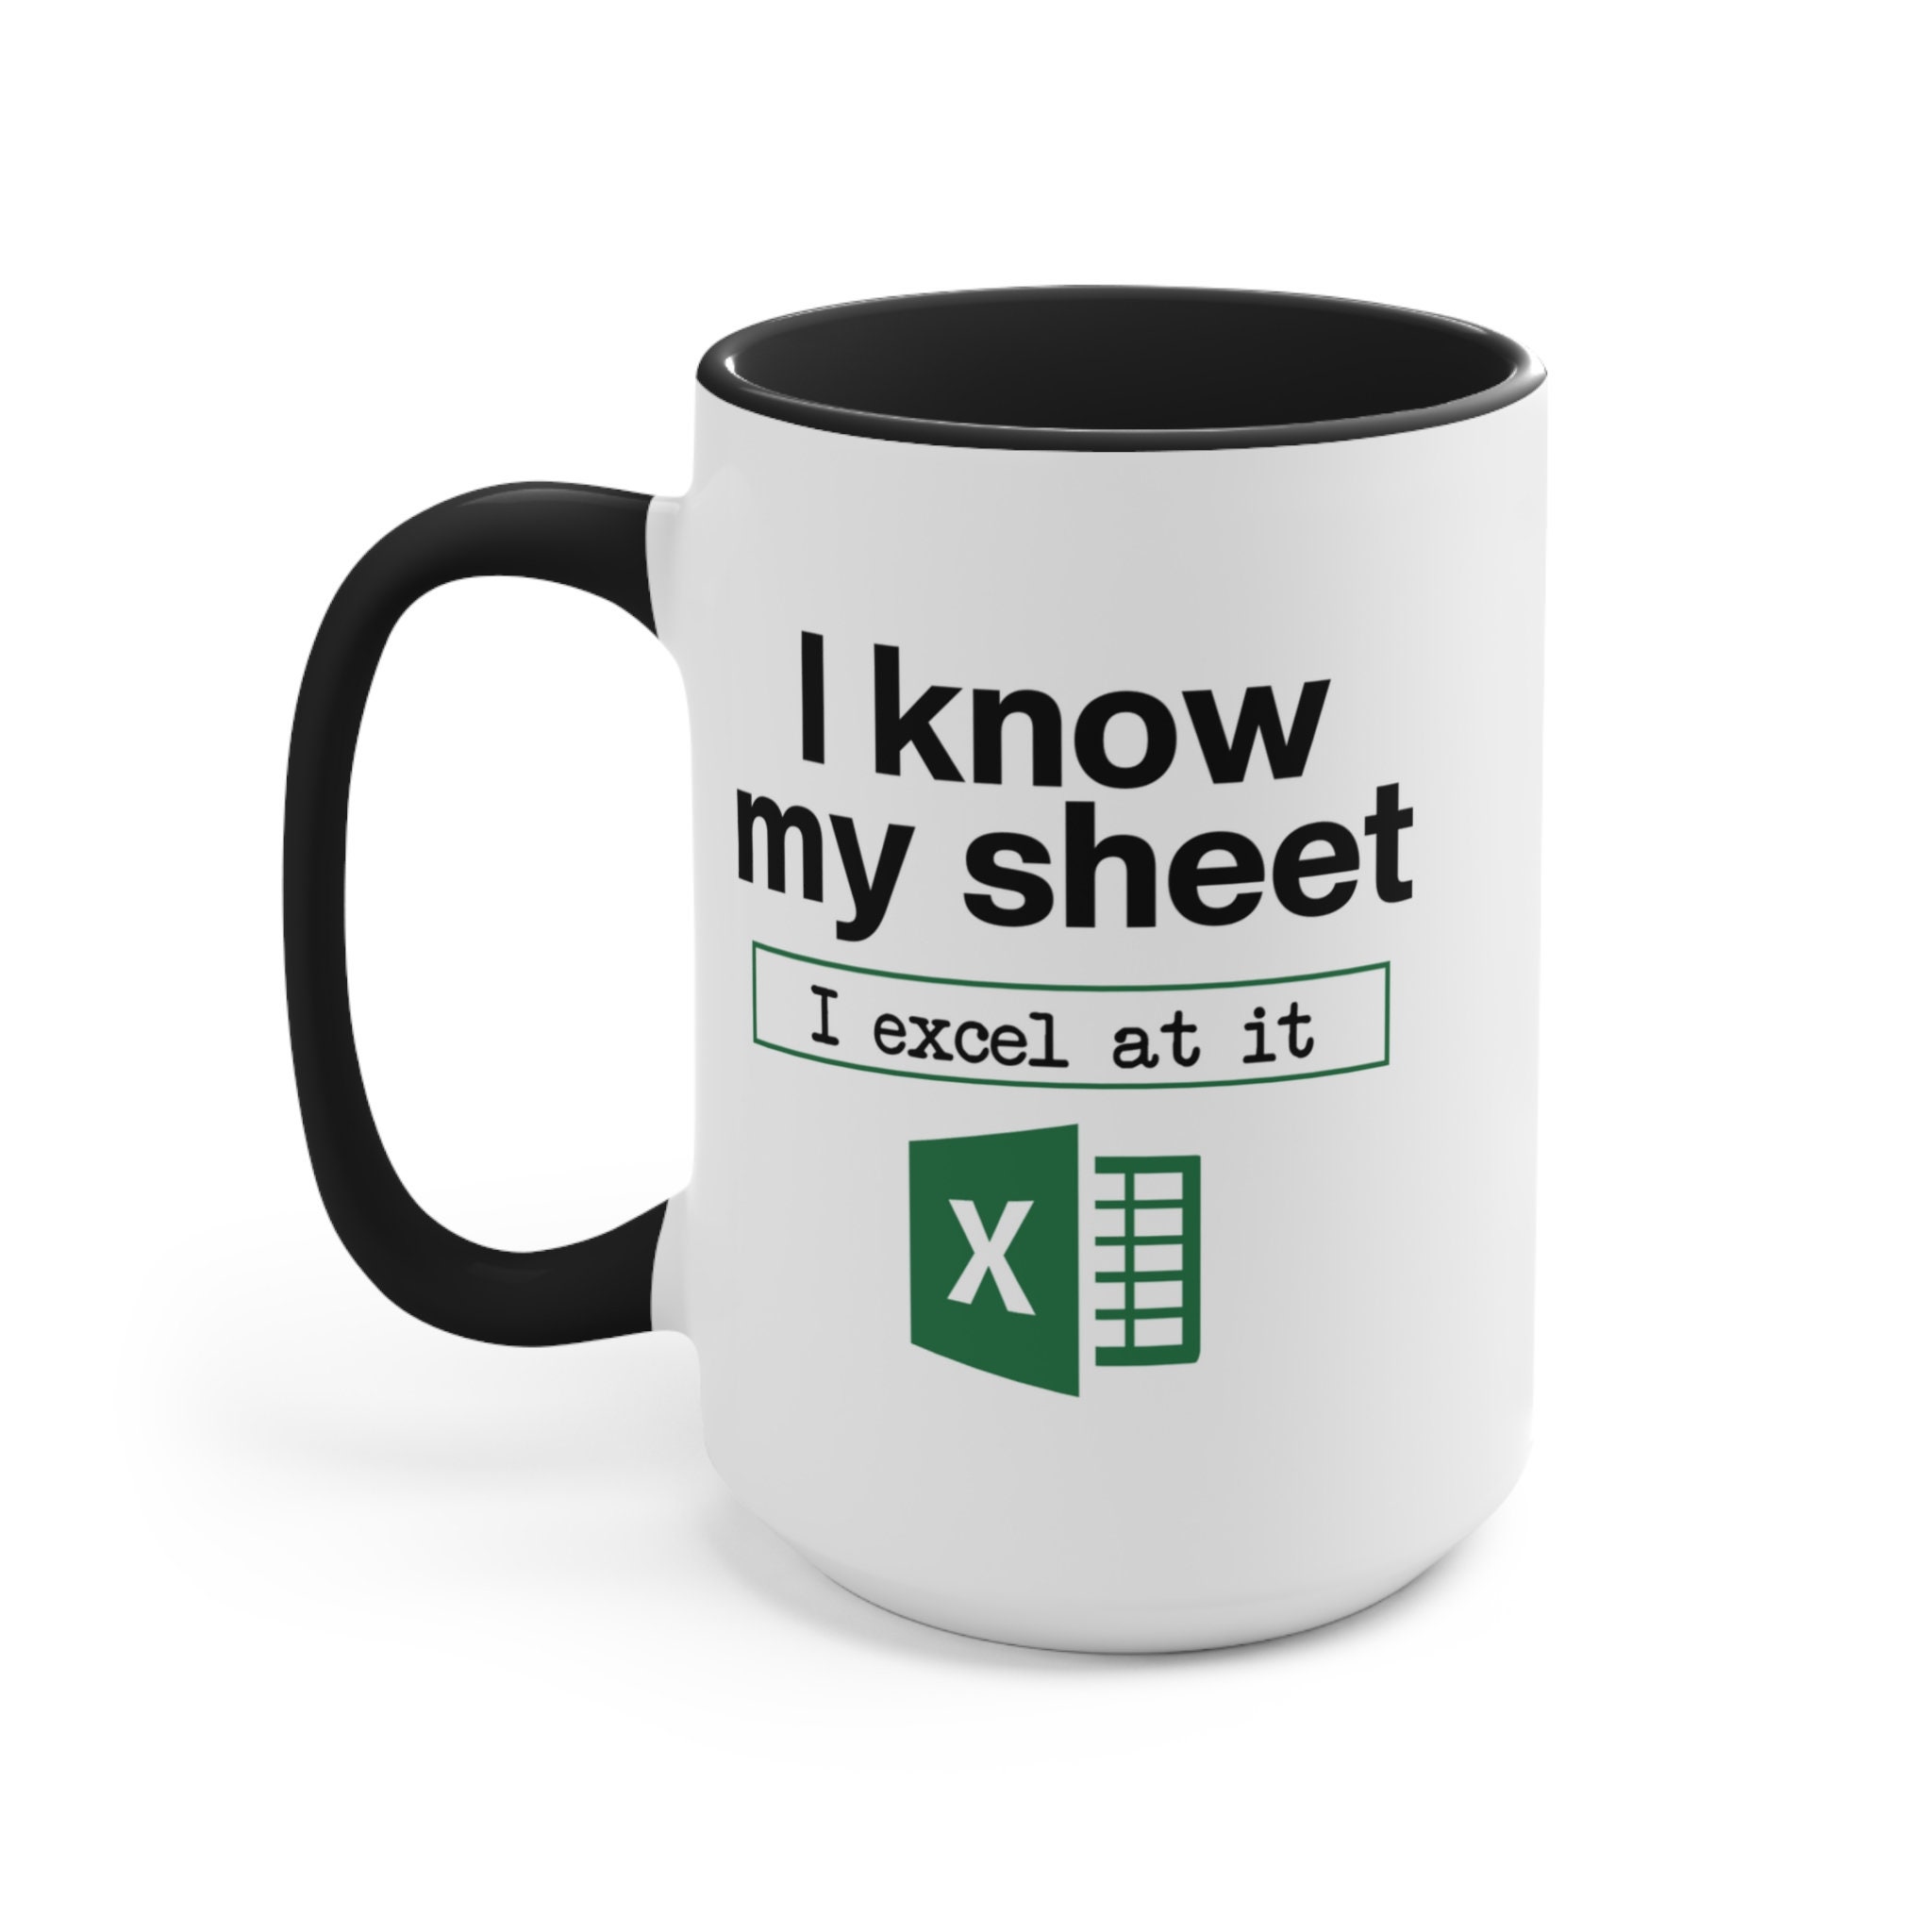 When You Exel They Always Spreadsheet About You Mug